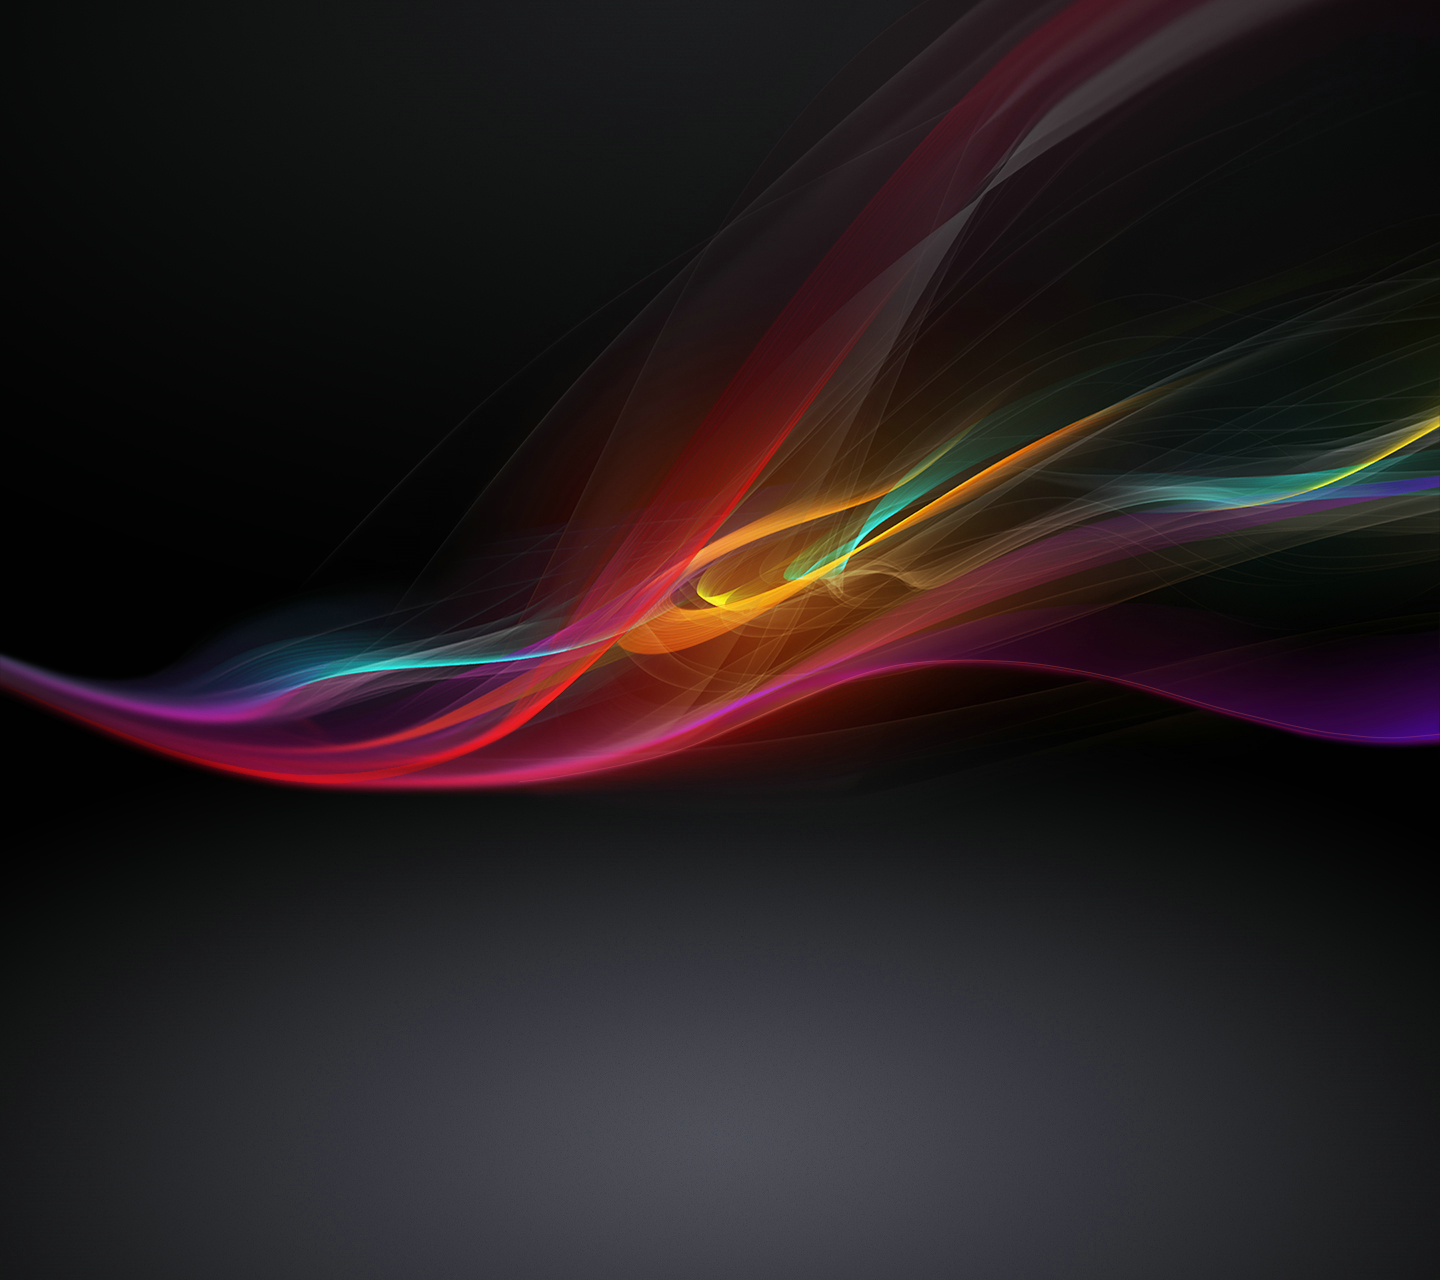 Sony Xperia Z Home Screen Lock Screen Wallpapers Leaked TechDroid